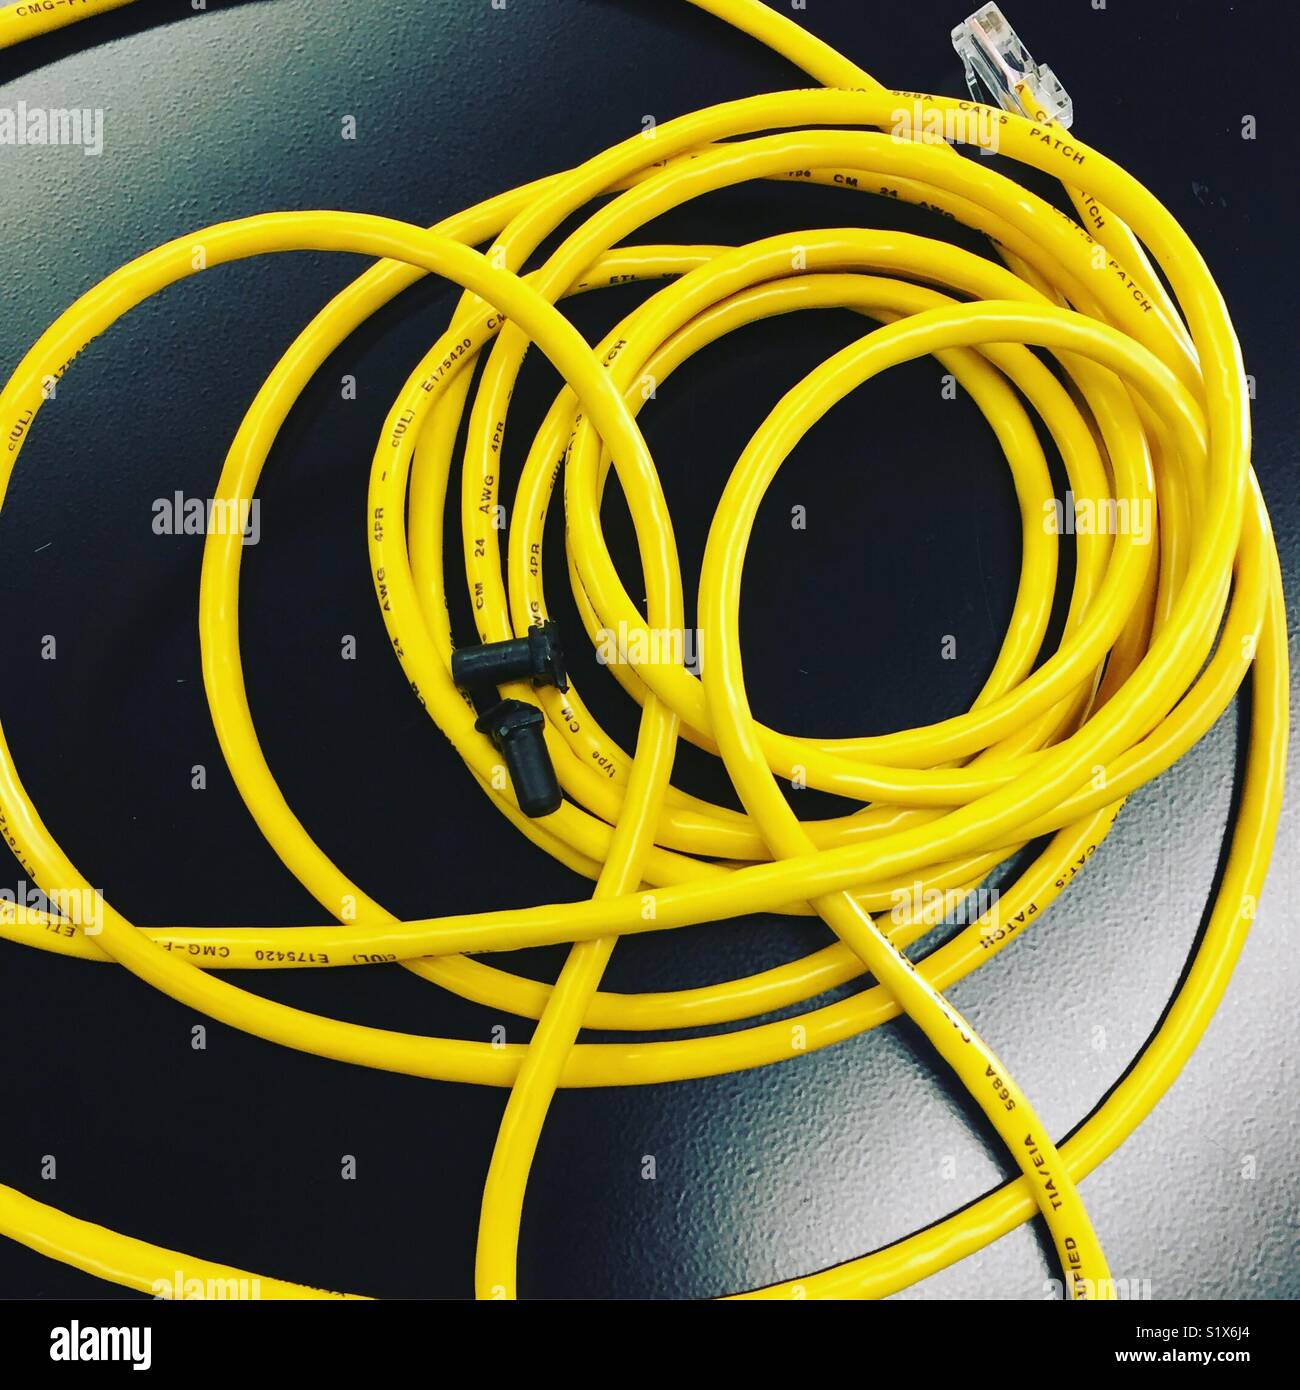 A yellow cable on black cabinet at work by K.R. Stock Photo